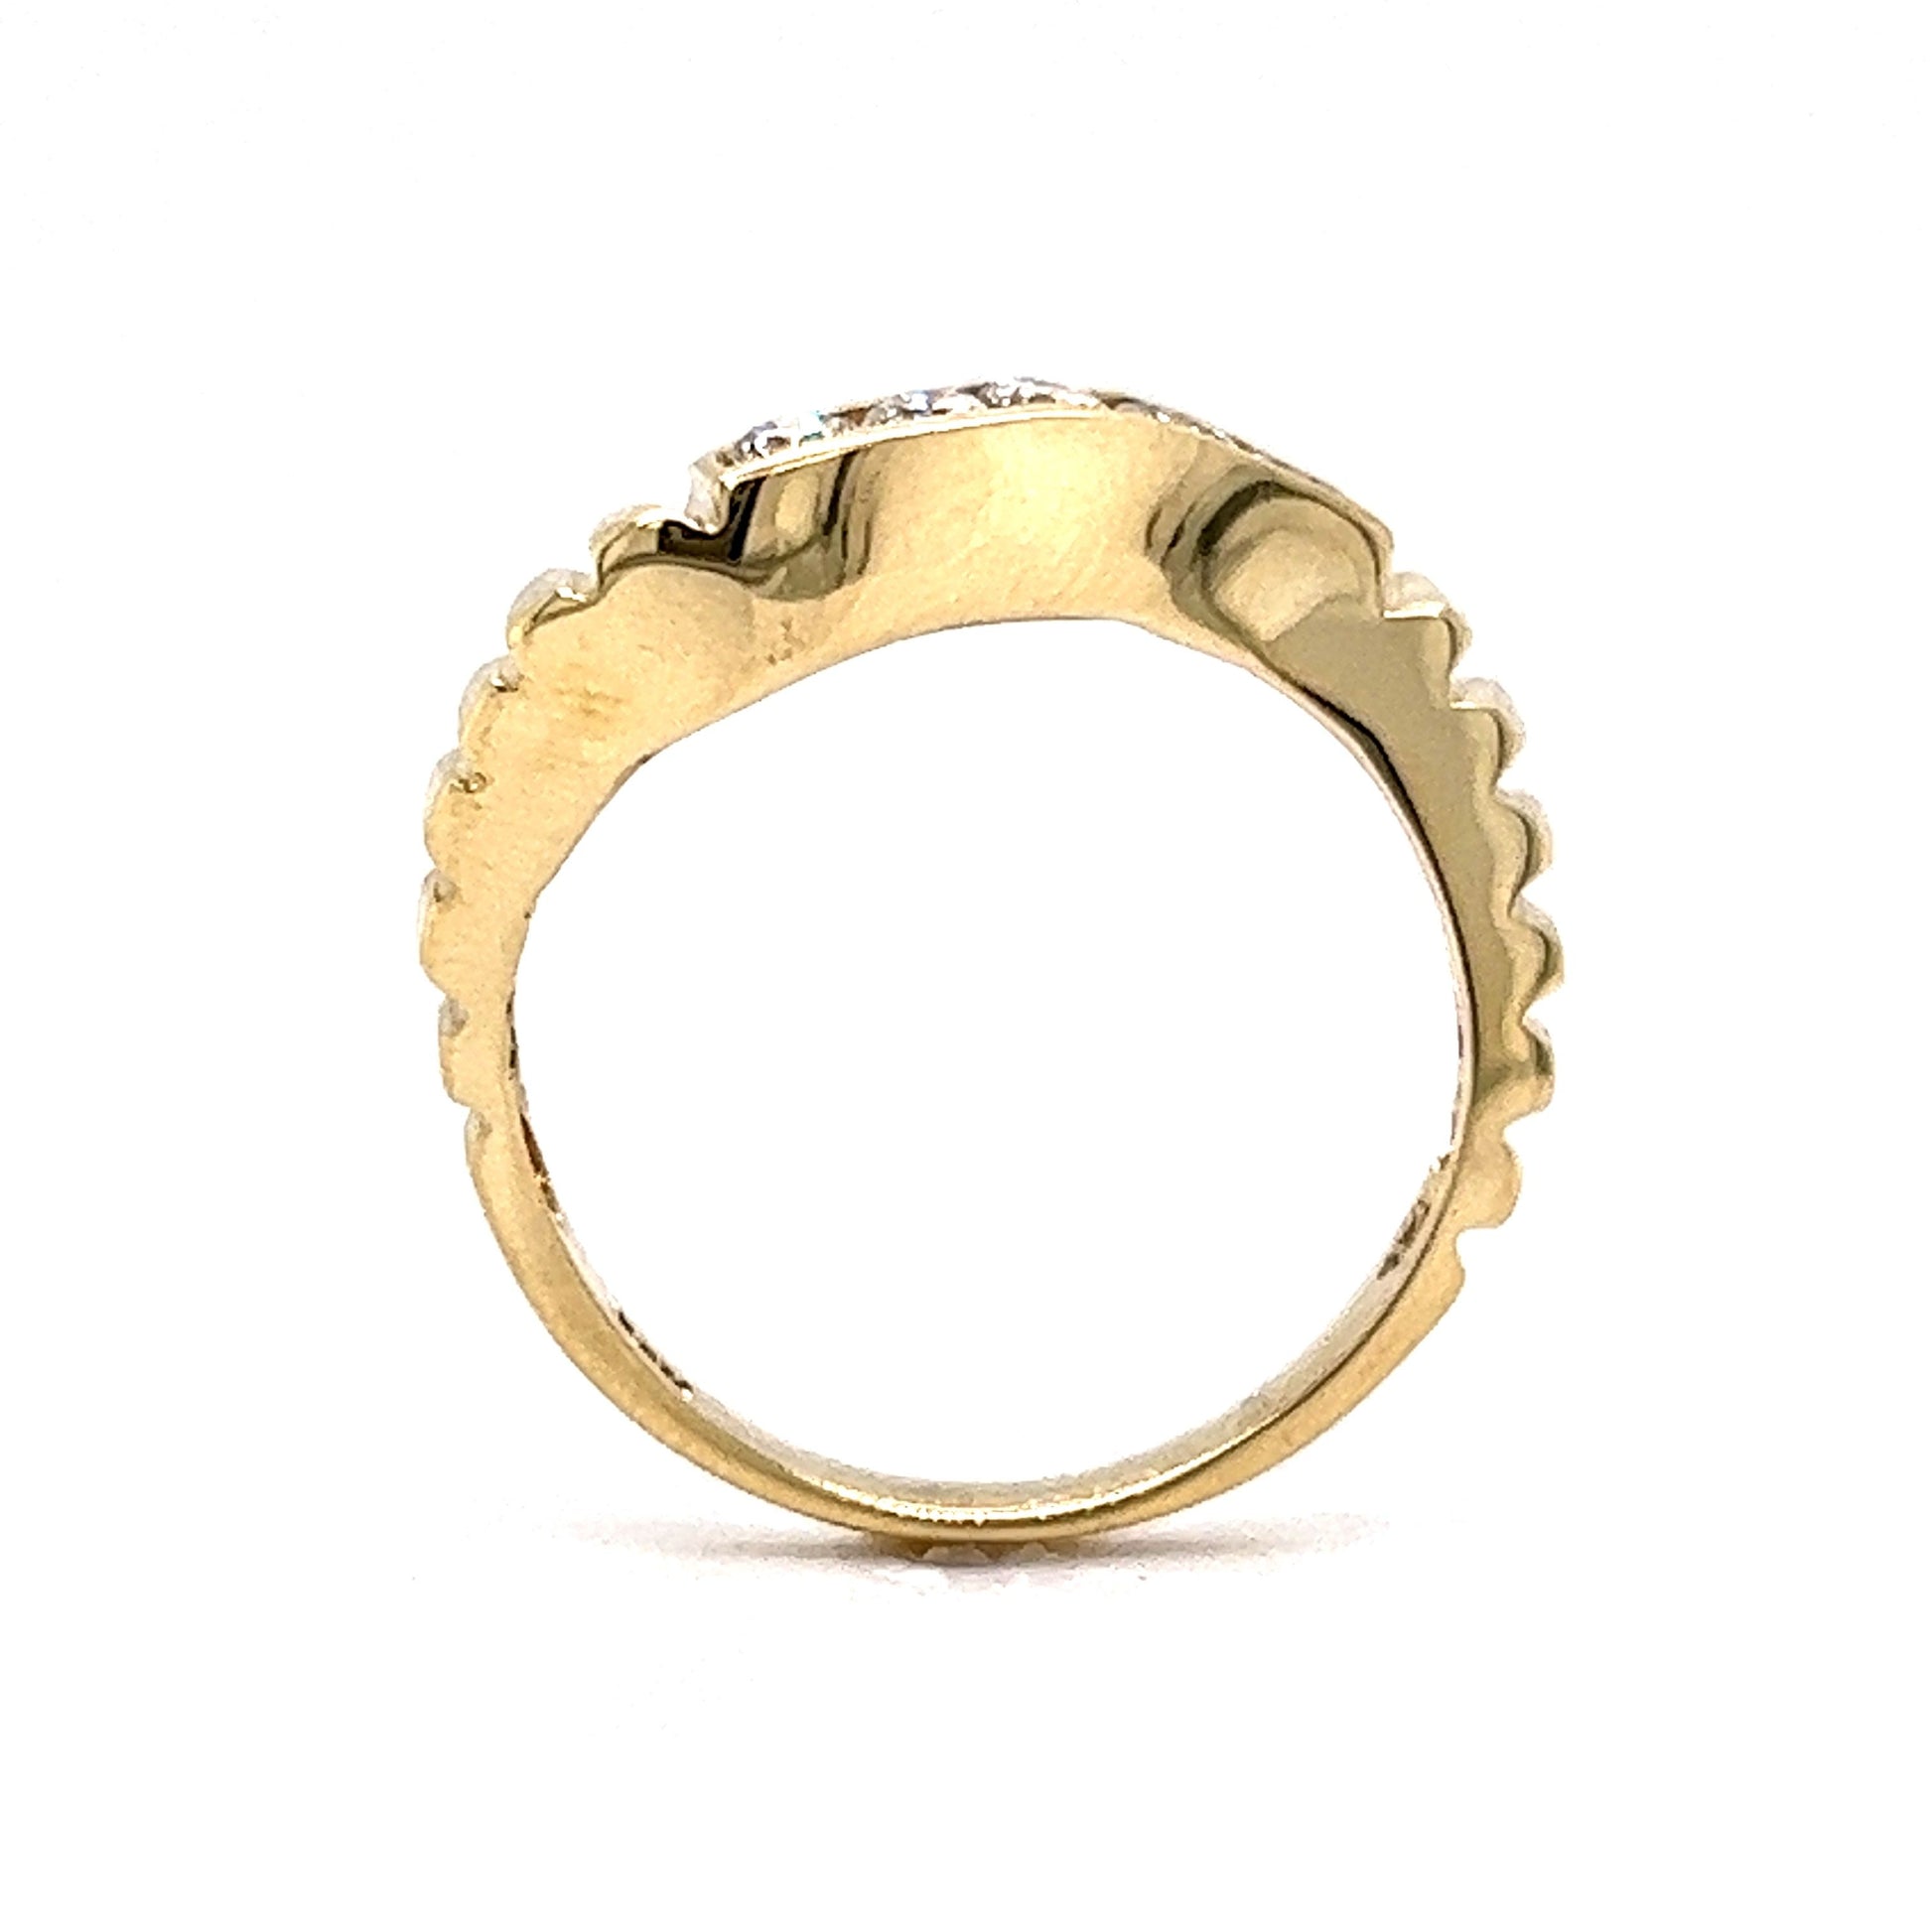 Textured Curved Diamond Stacking Ring in 14k Yellow Gold